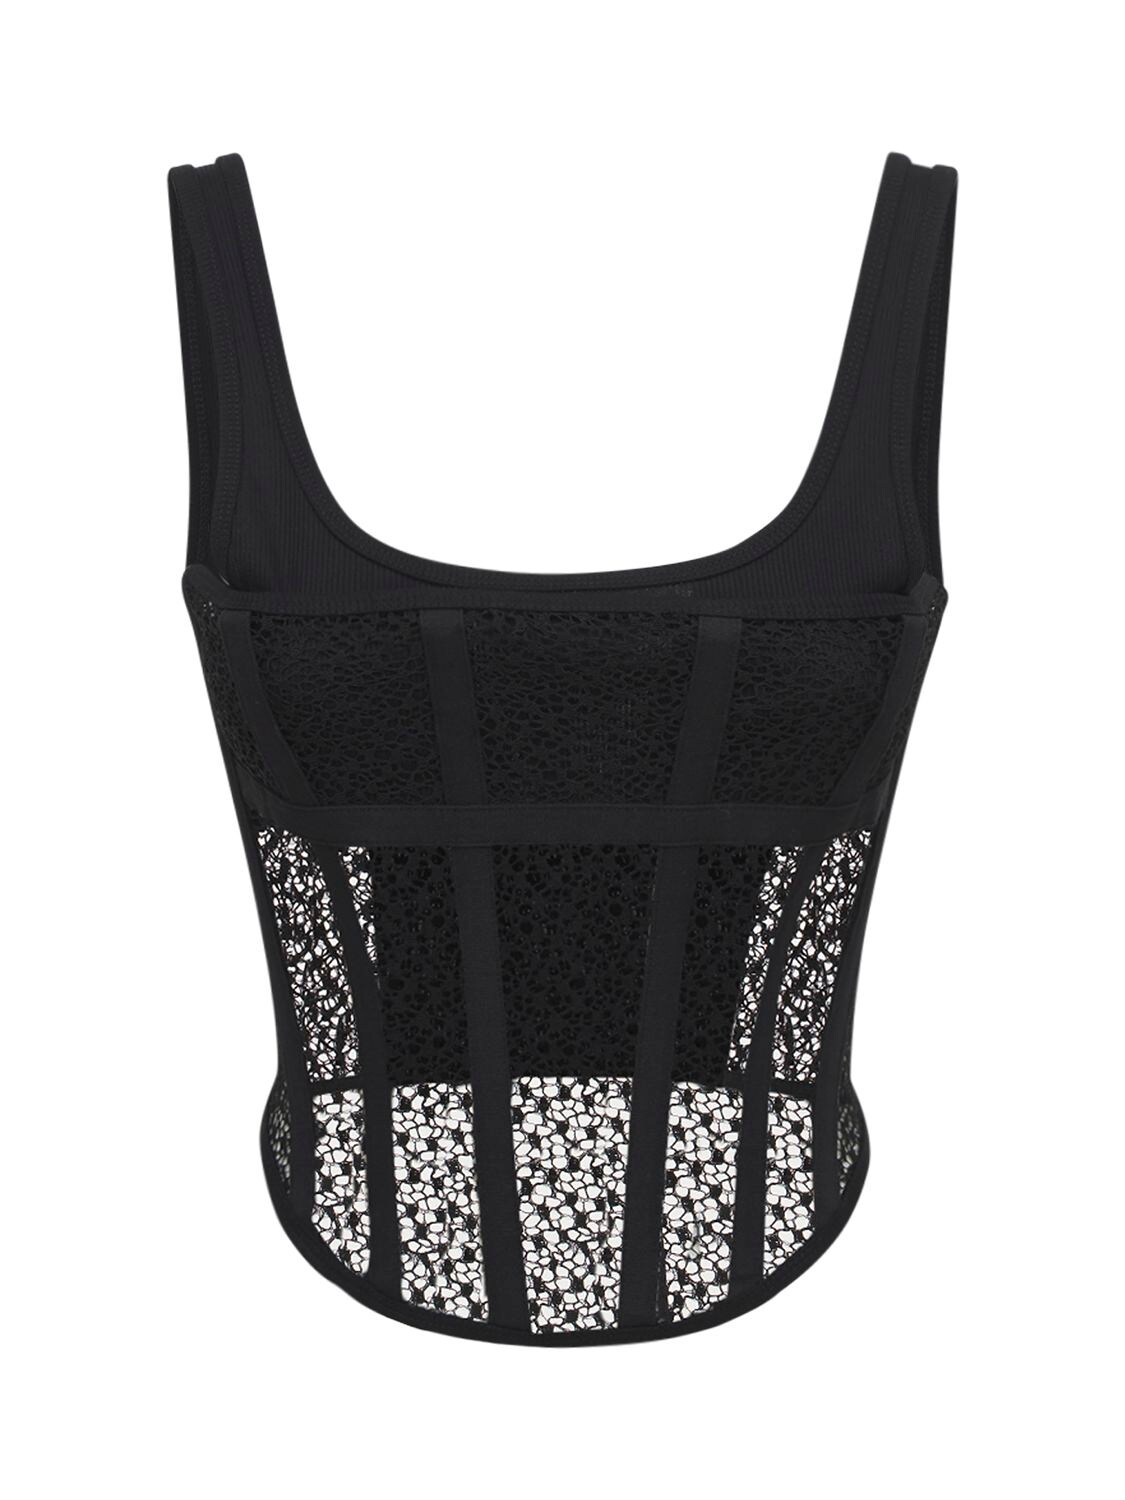 DION LEE NET LACE SUSPENDED CORSET TOP,74IXYP030-QKXBQ0S1